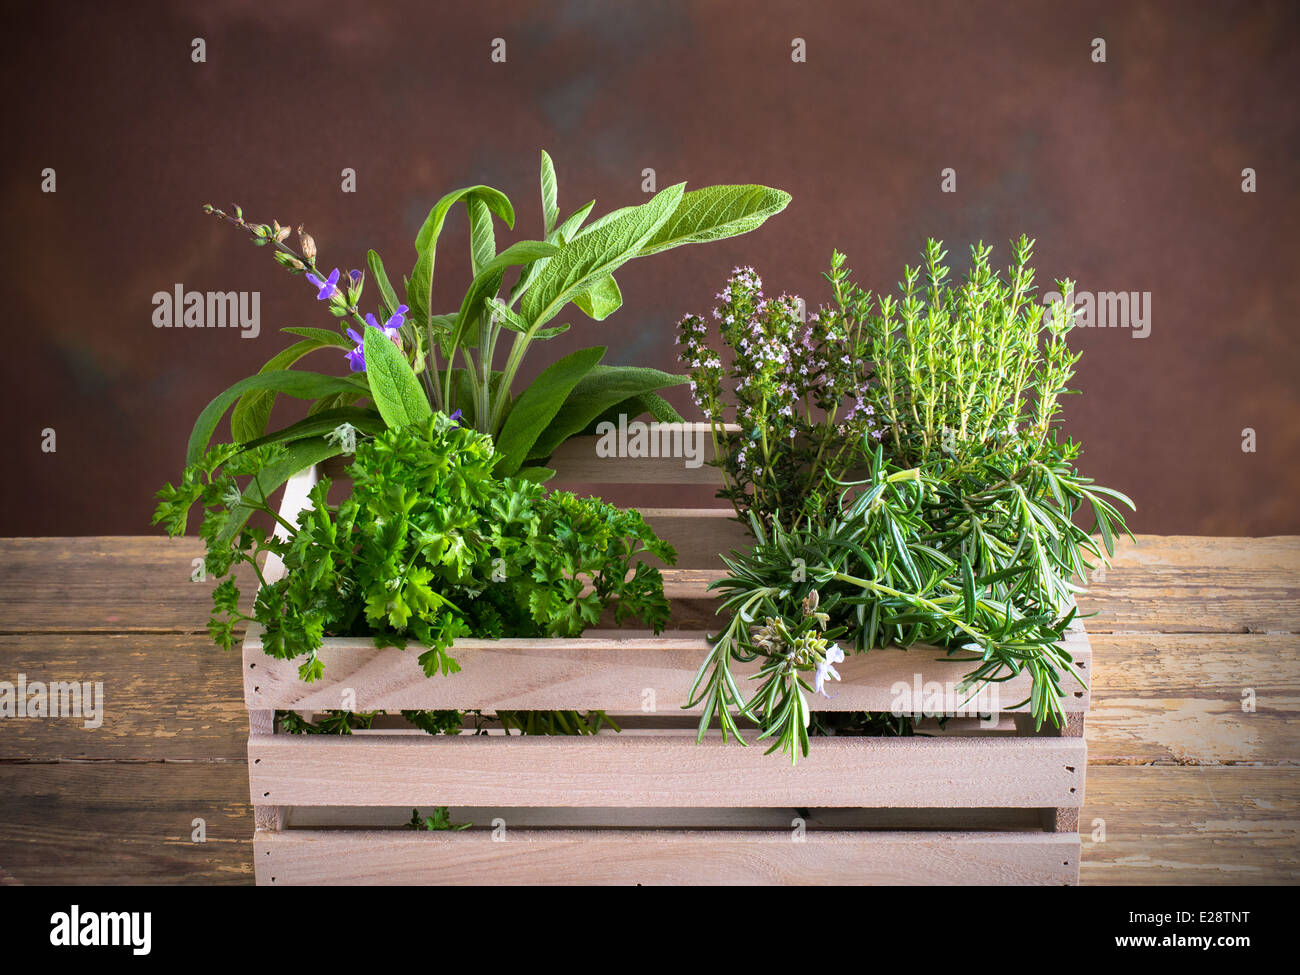 Herbs - parsley, sage, rosemary and thyme for cooking Stock Photo